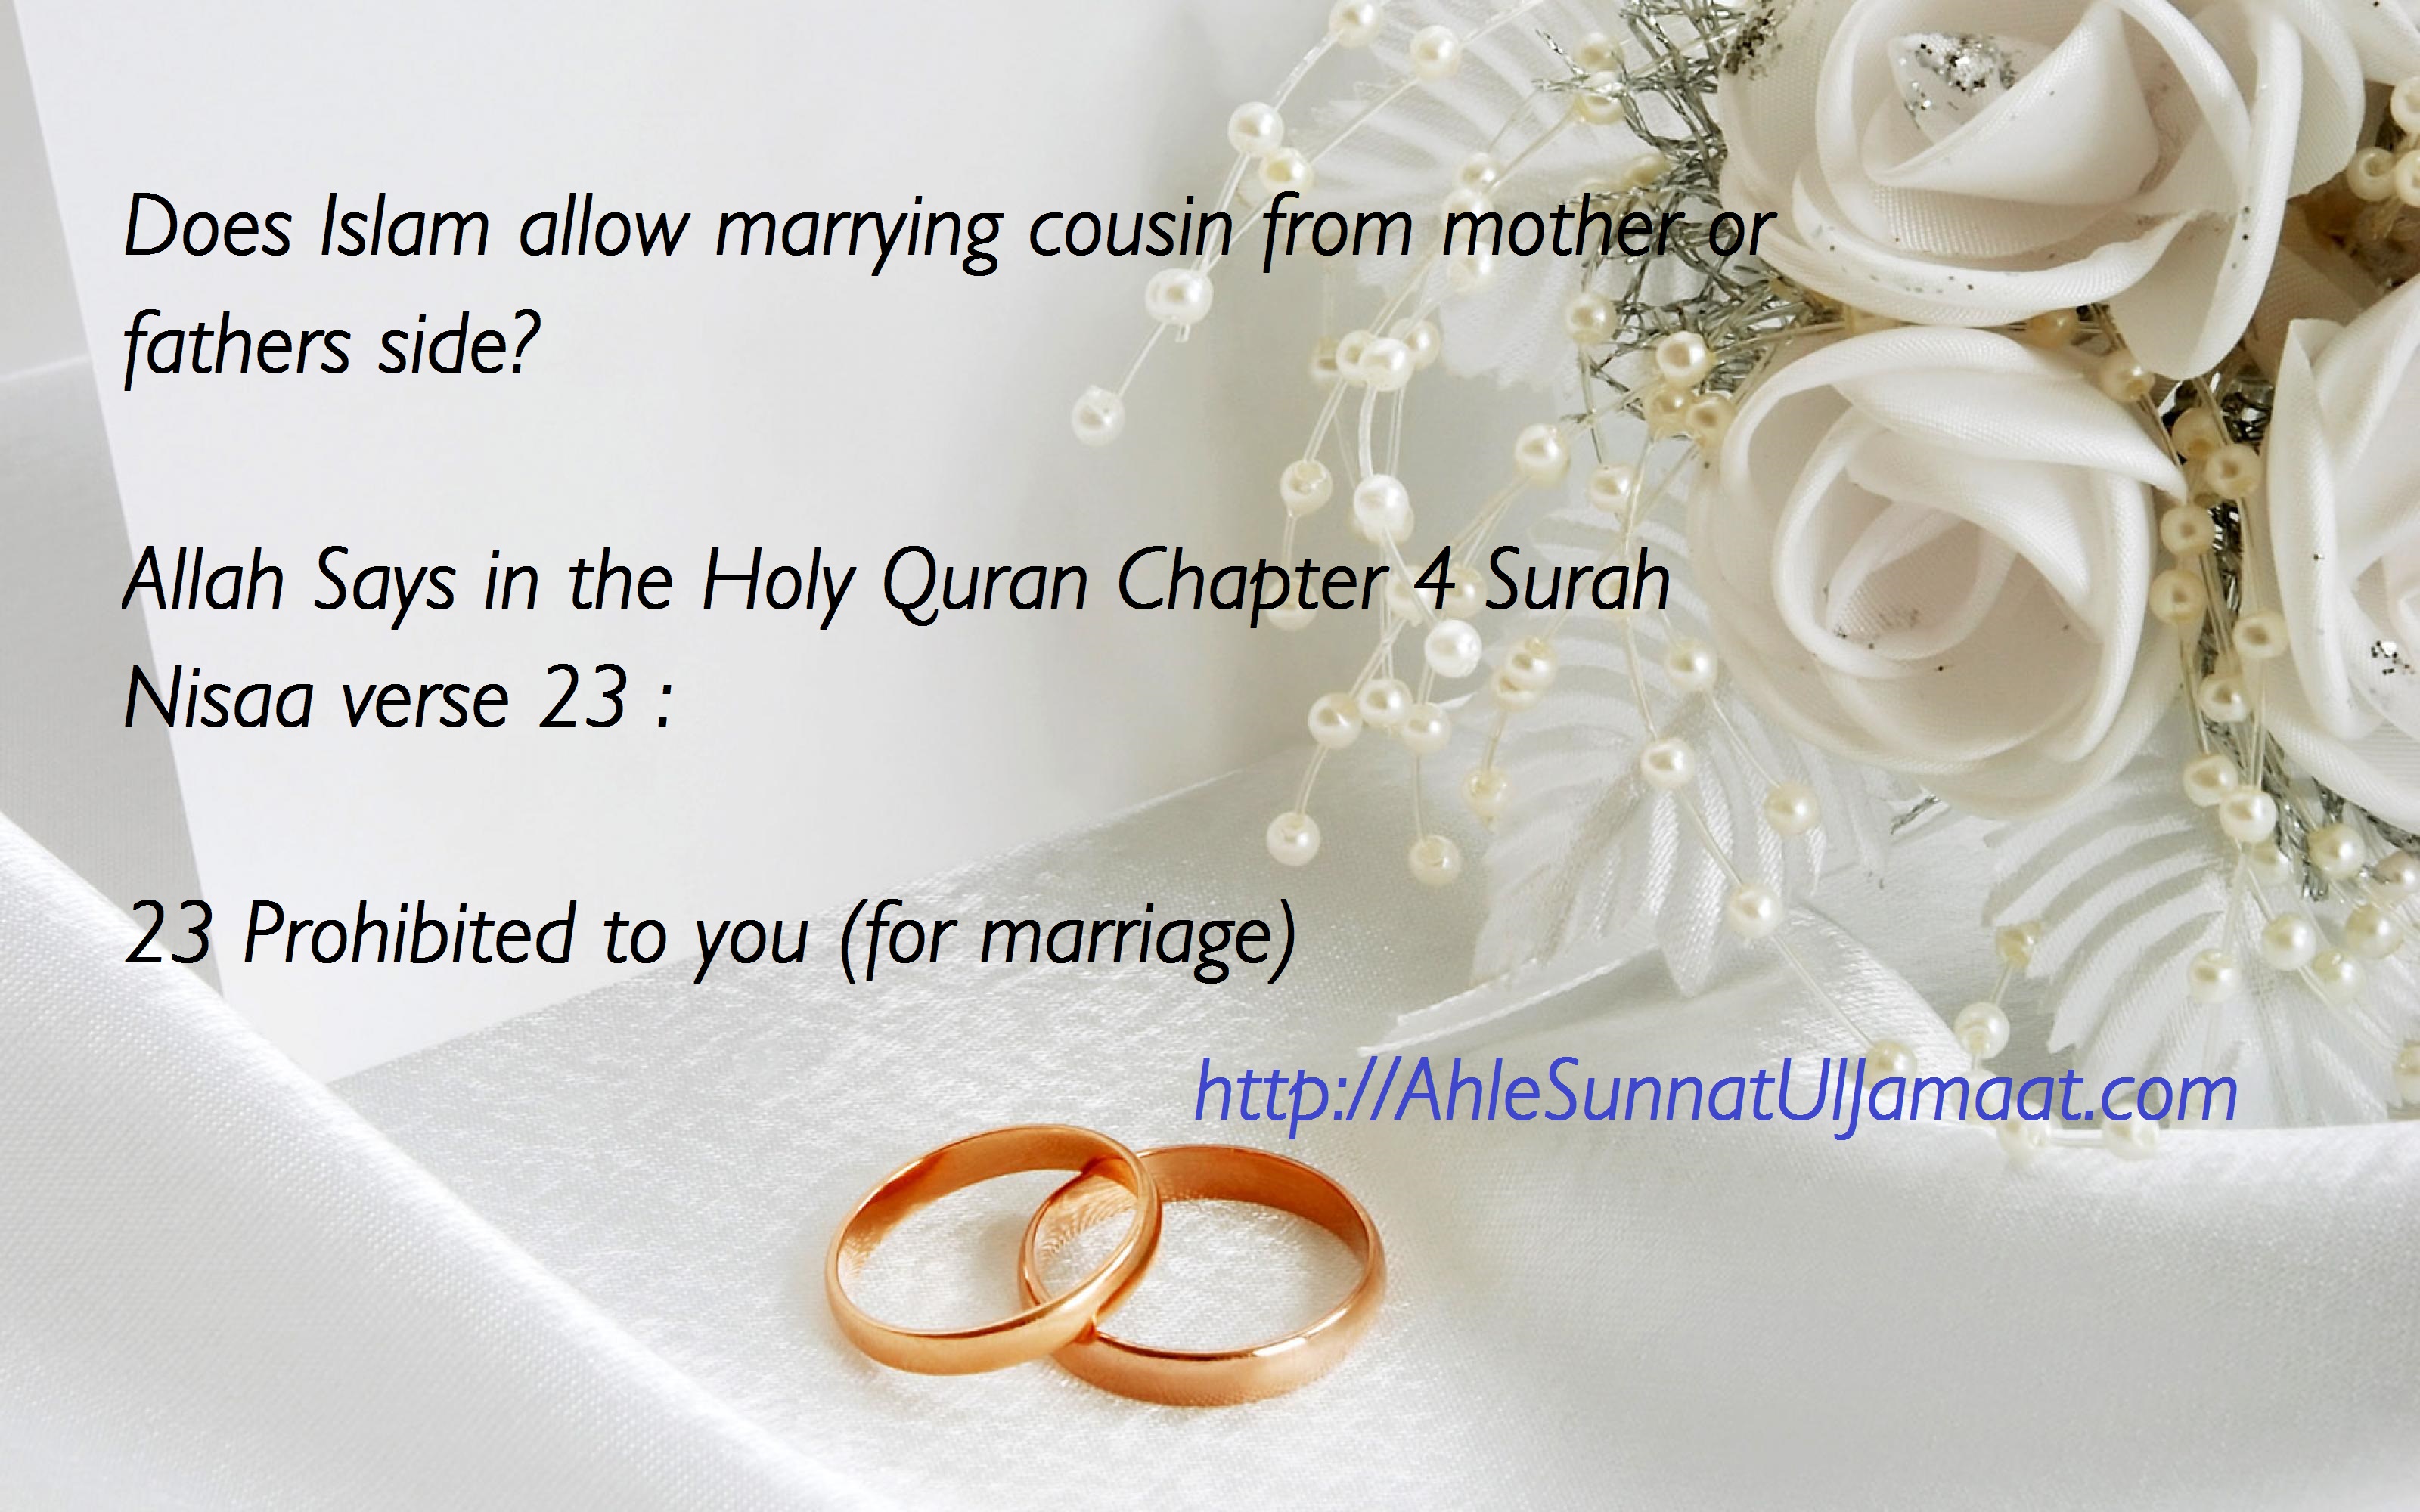 According to Islam who we can marry among relatives?